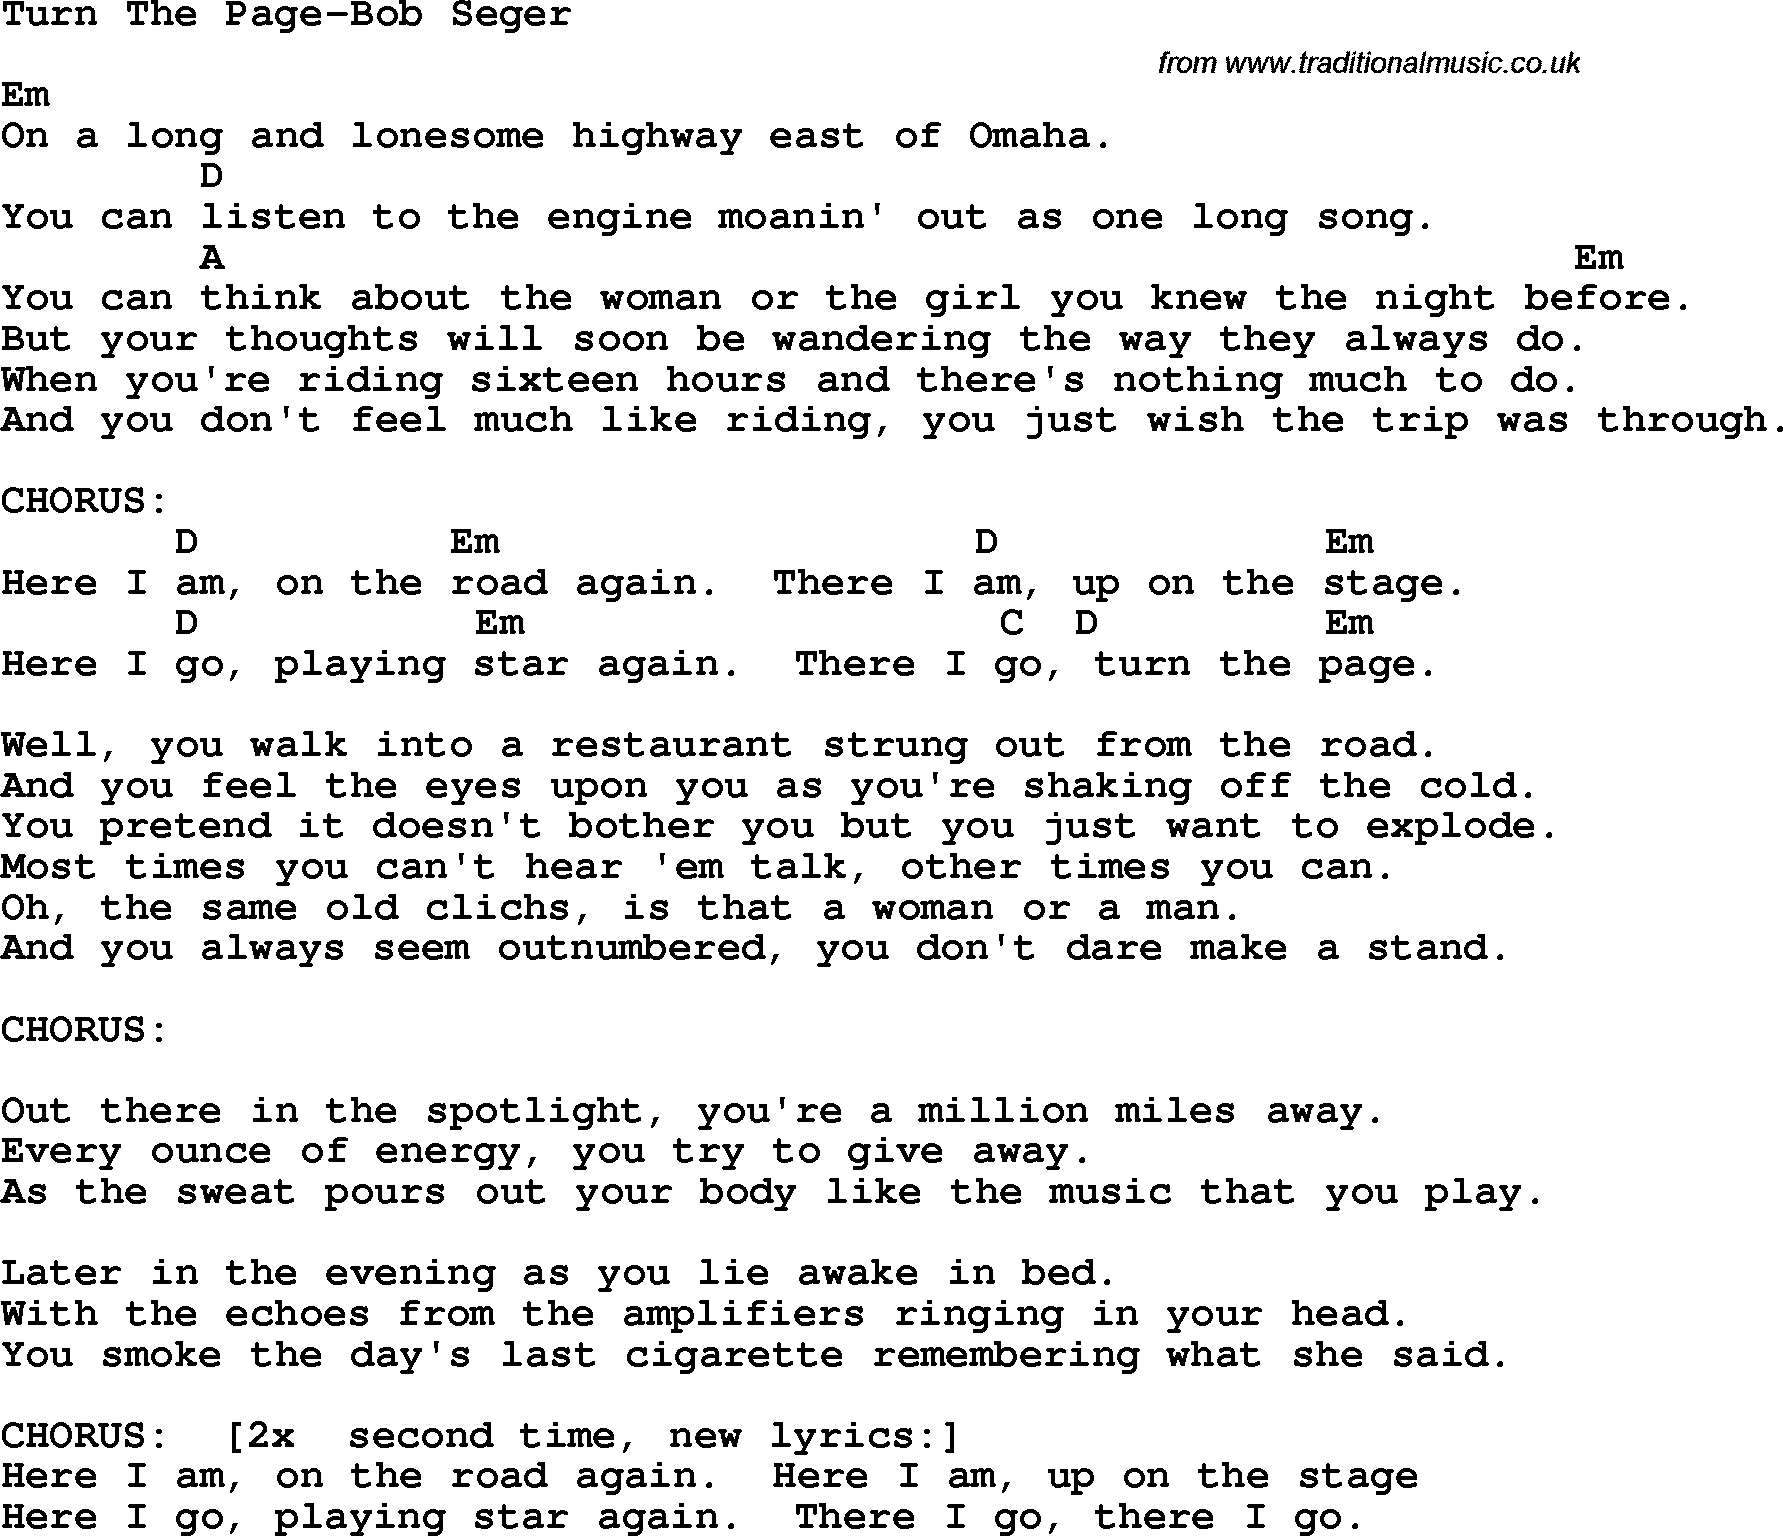 Protest Song Turn The Page-Bob Seger lyrics and chords